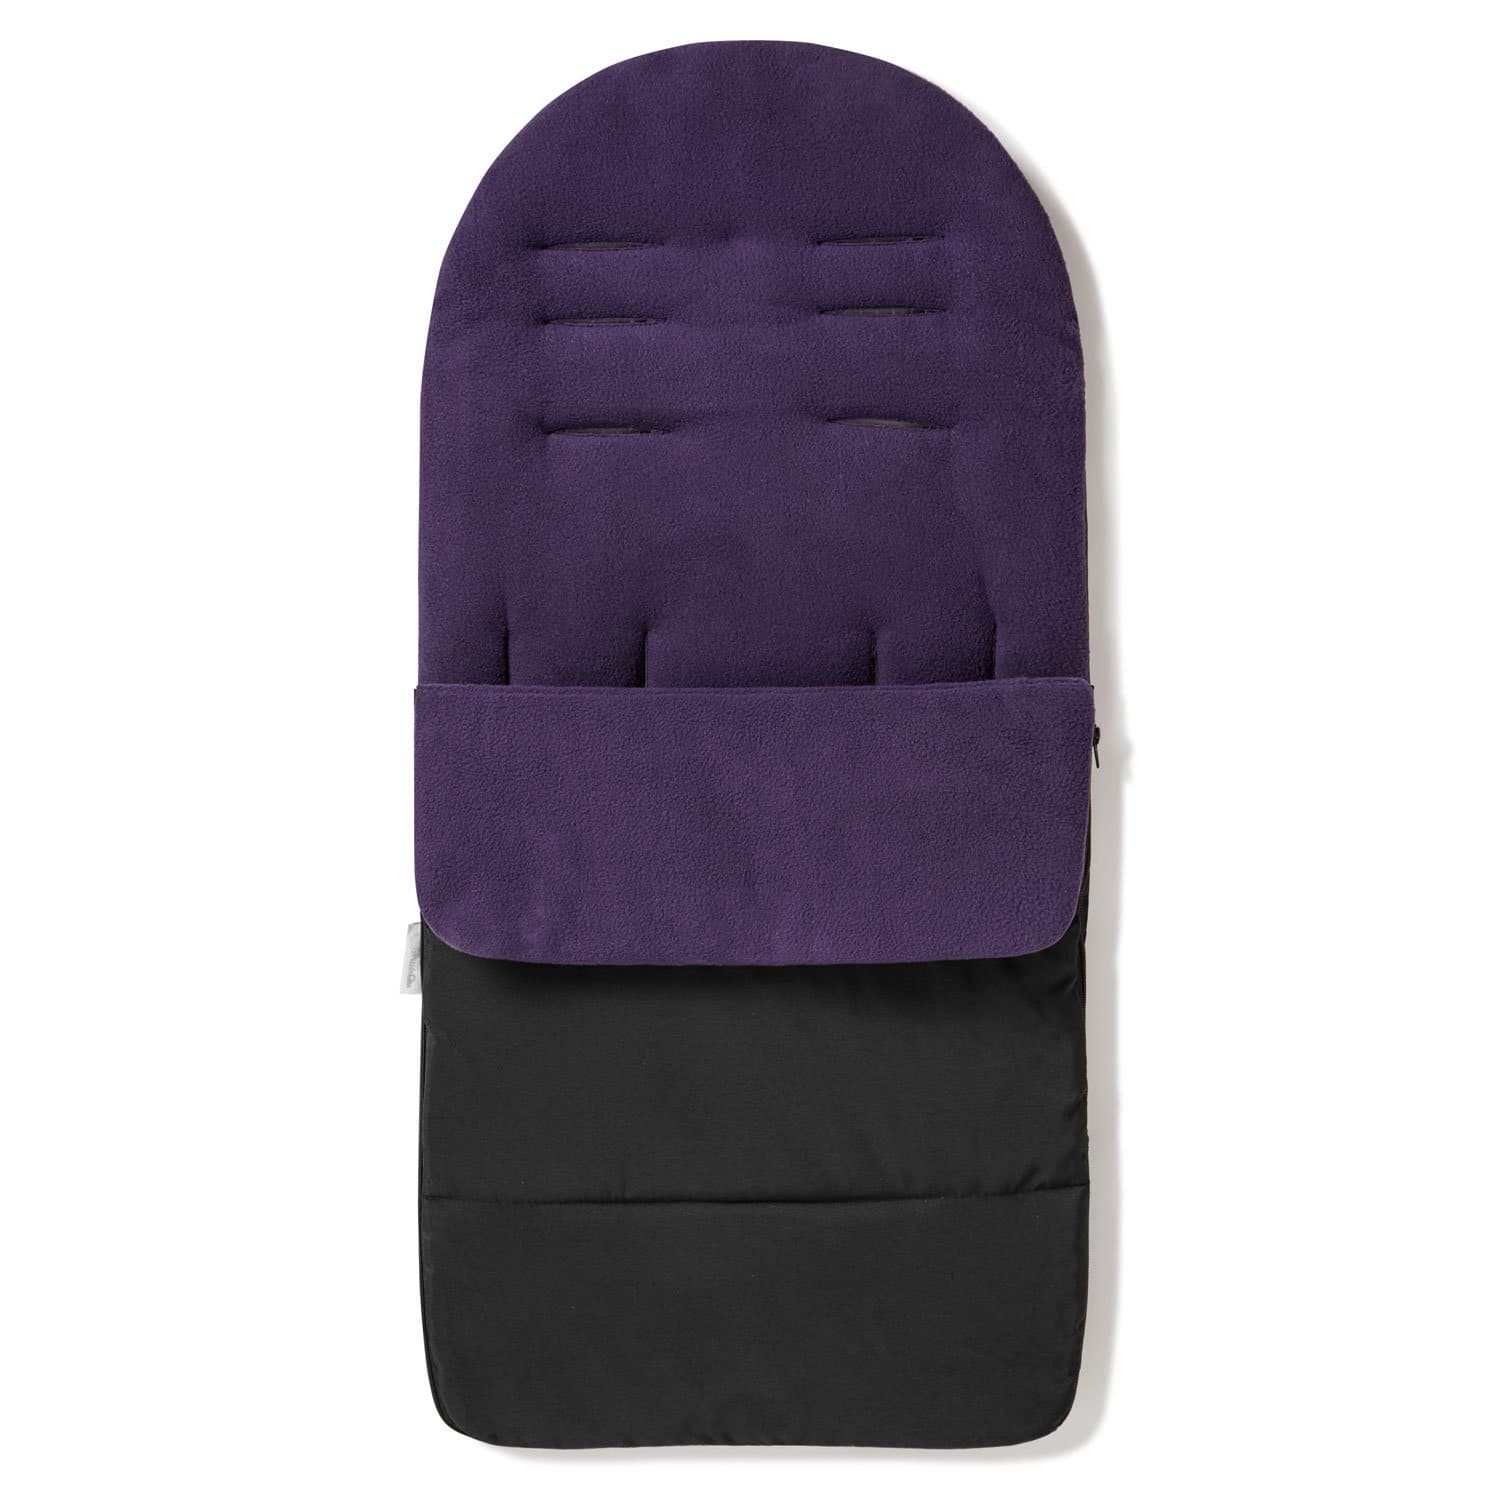 Premium Footmuff / Cosy Toes Compatible with Babyzen - Plum Purple / Fits All Models | For Your Little One